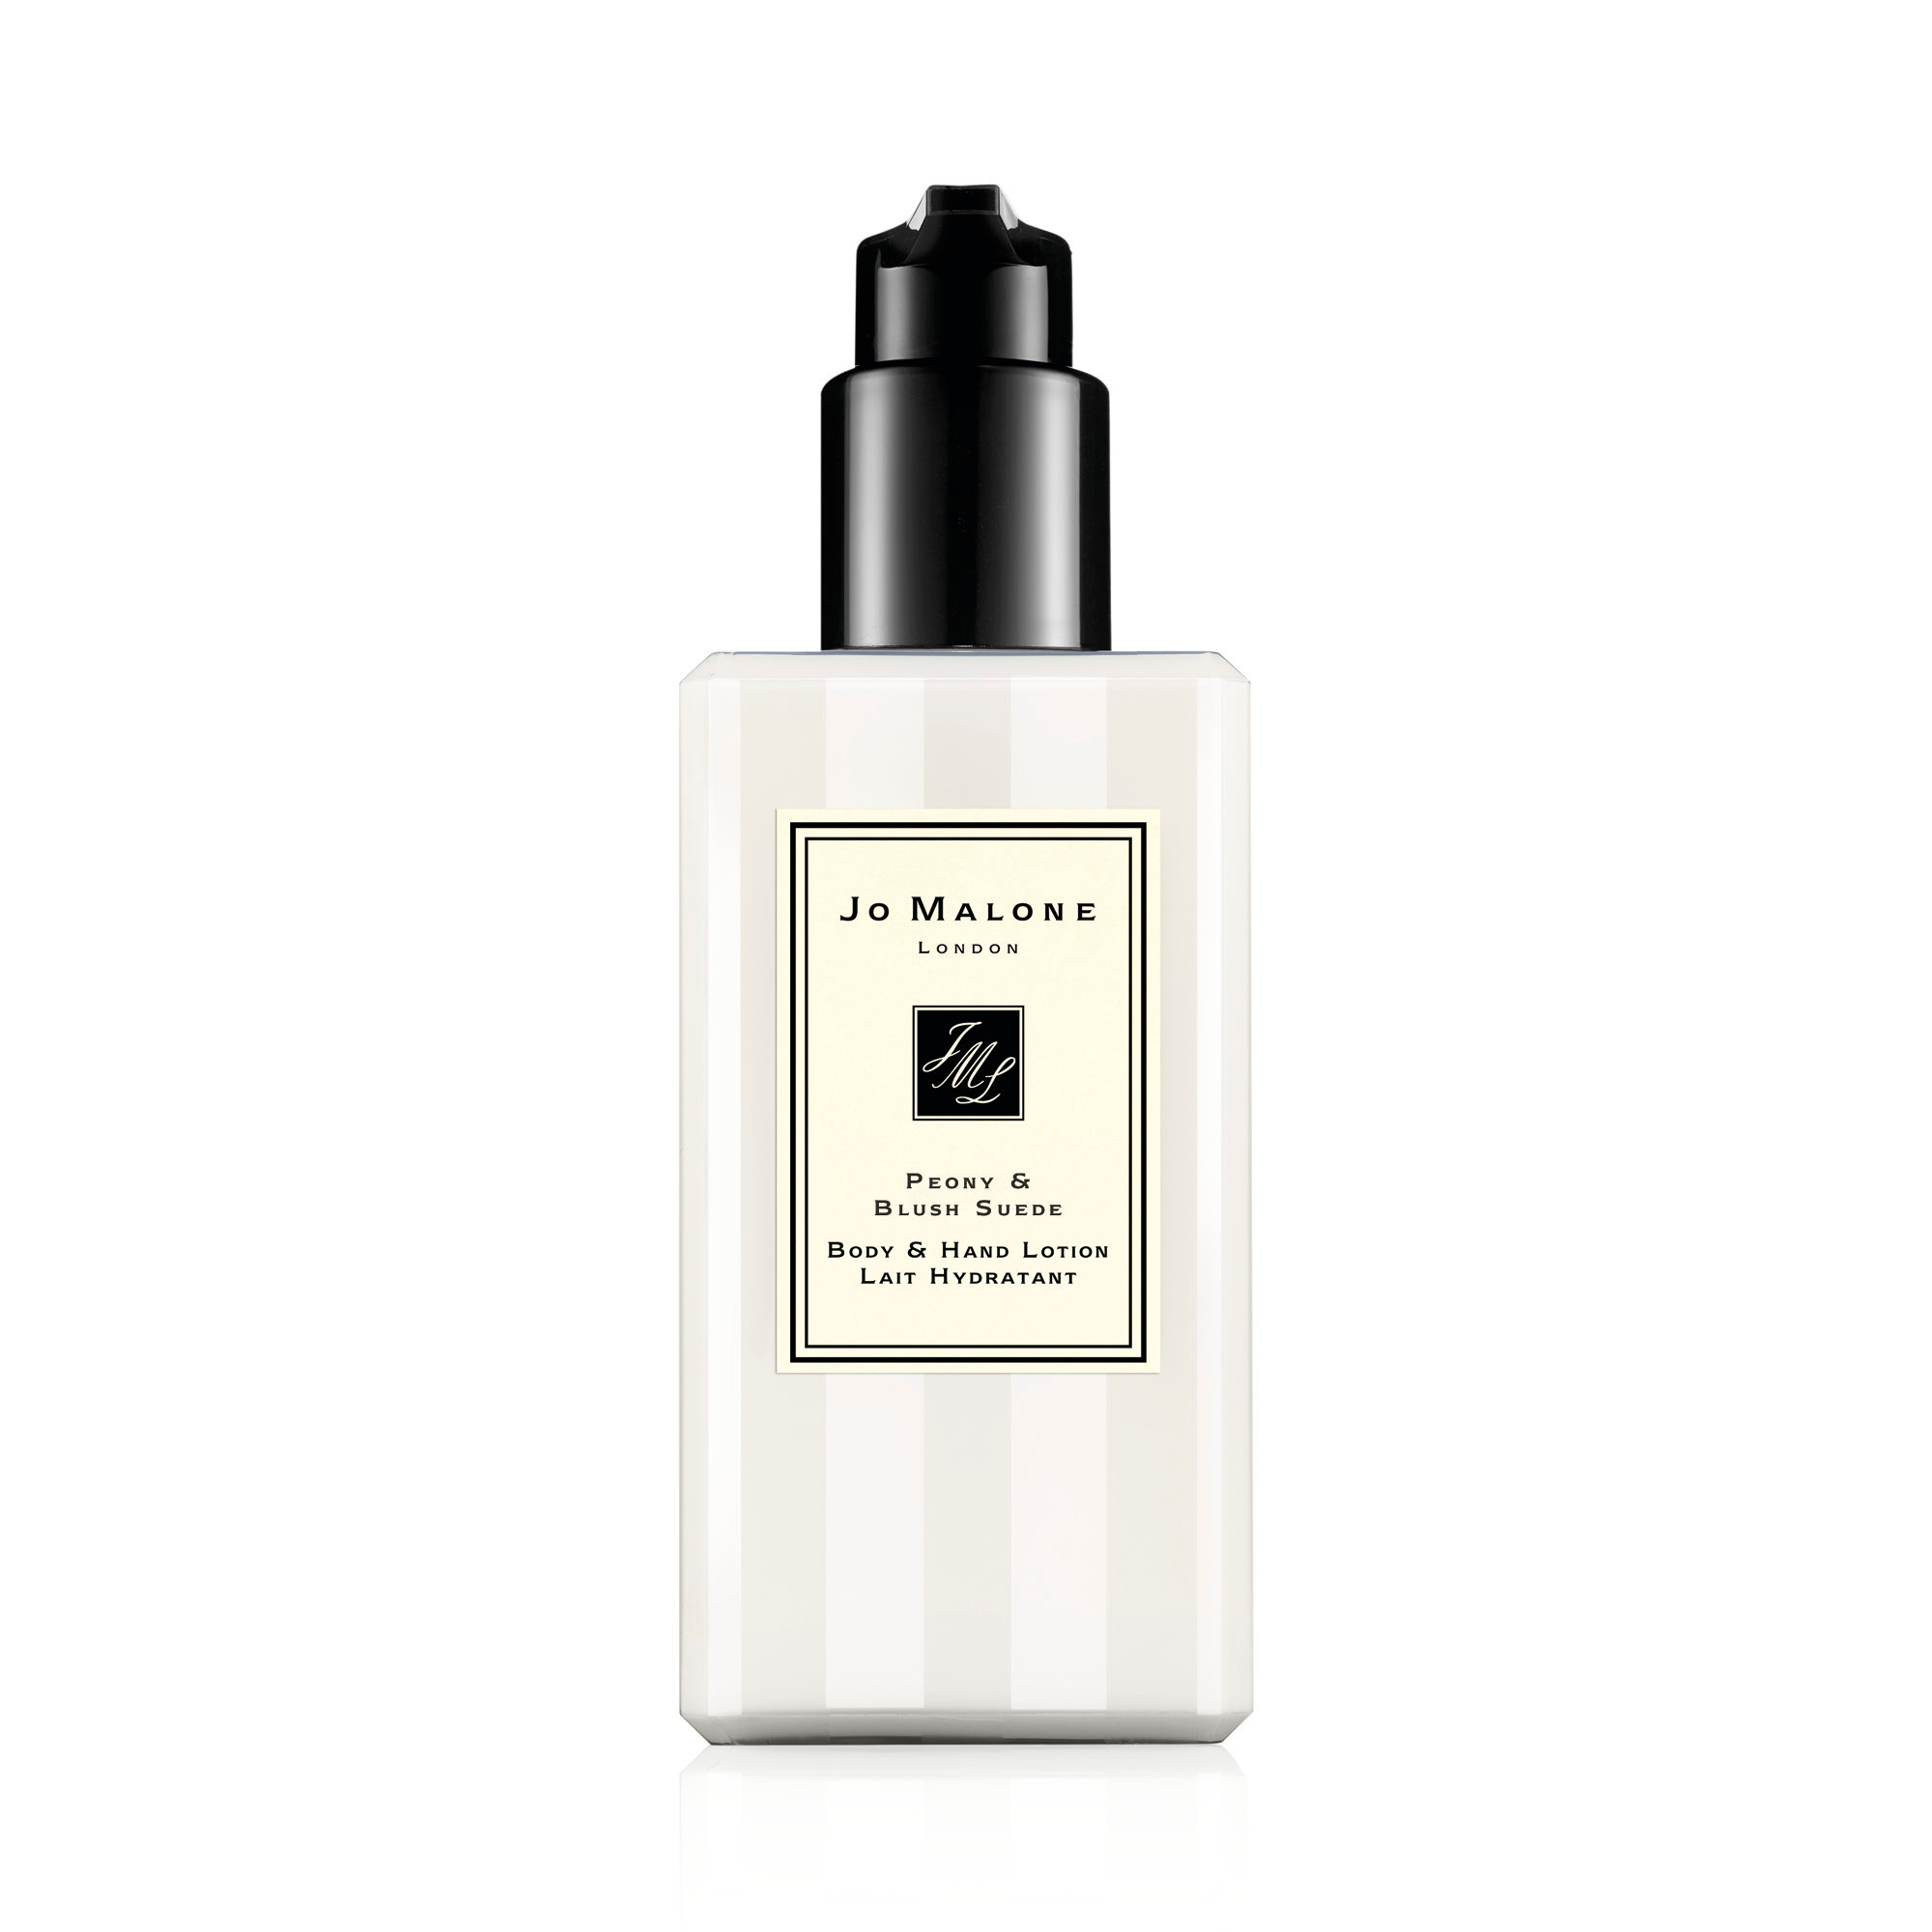 Jo Malone London peony & blush suede body & hand lotion 250 ml, Beige, large image number 0